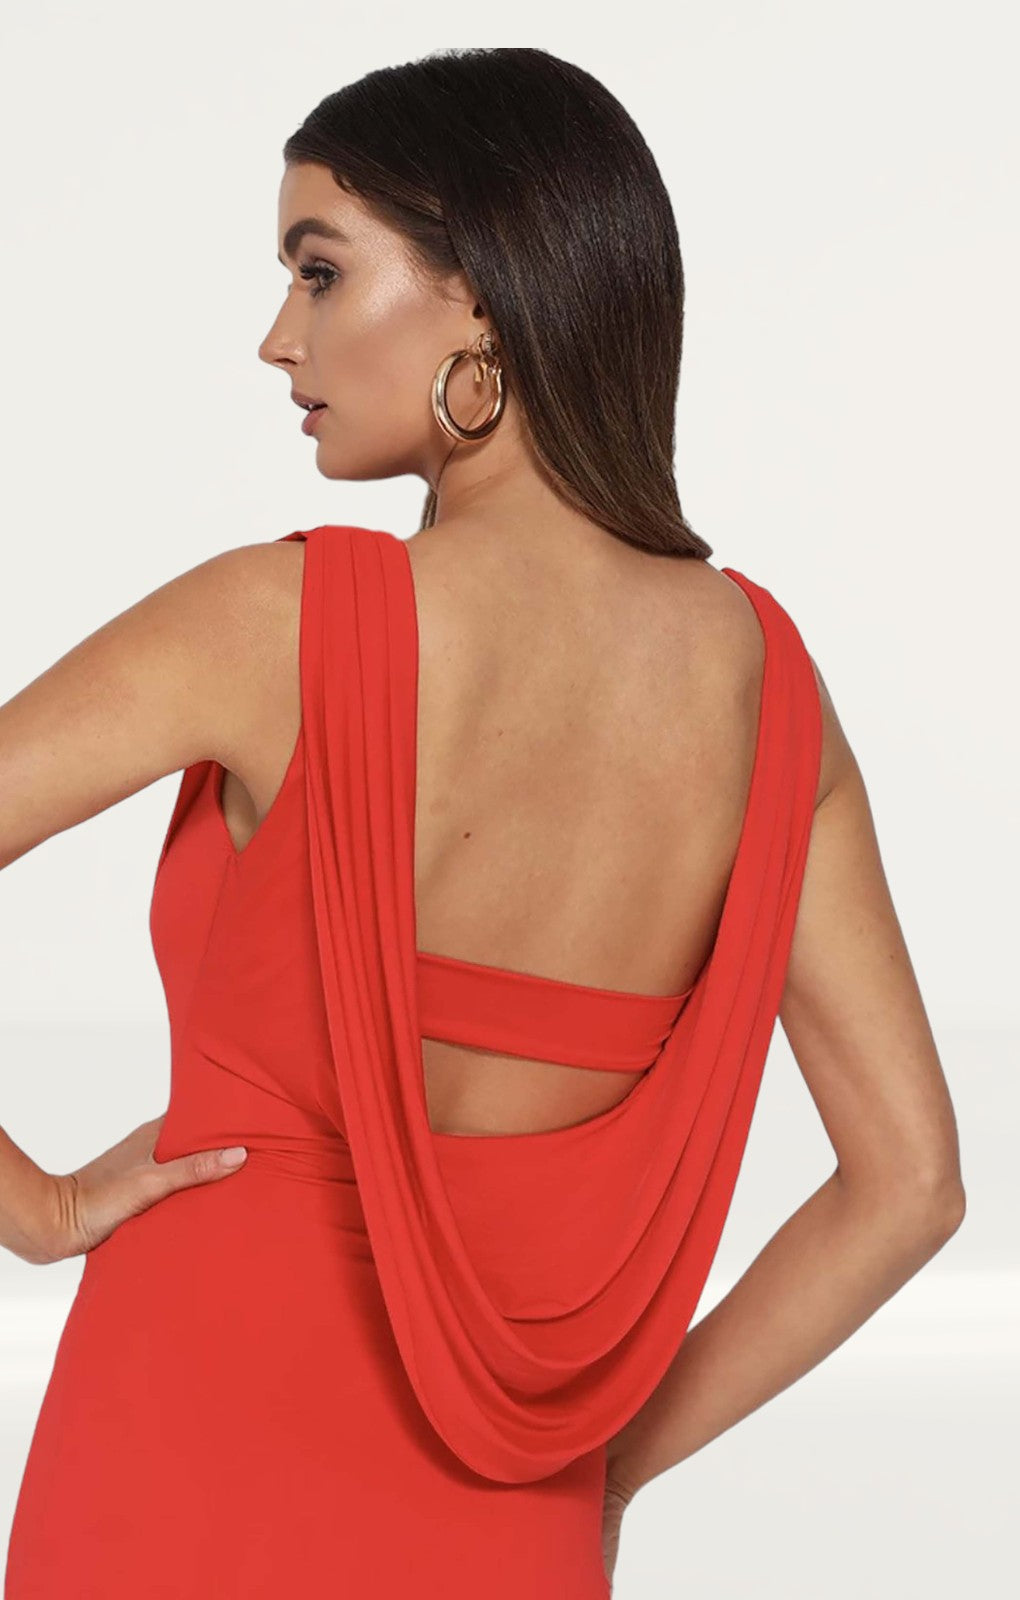 Runaway The Label Flame Dress In Red product image